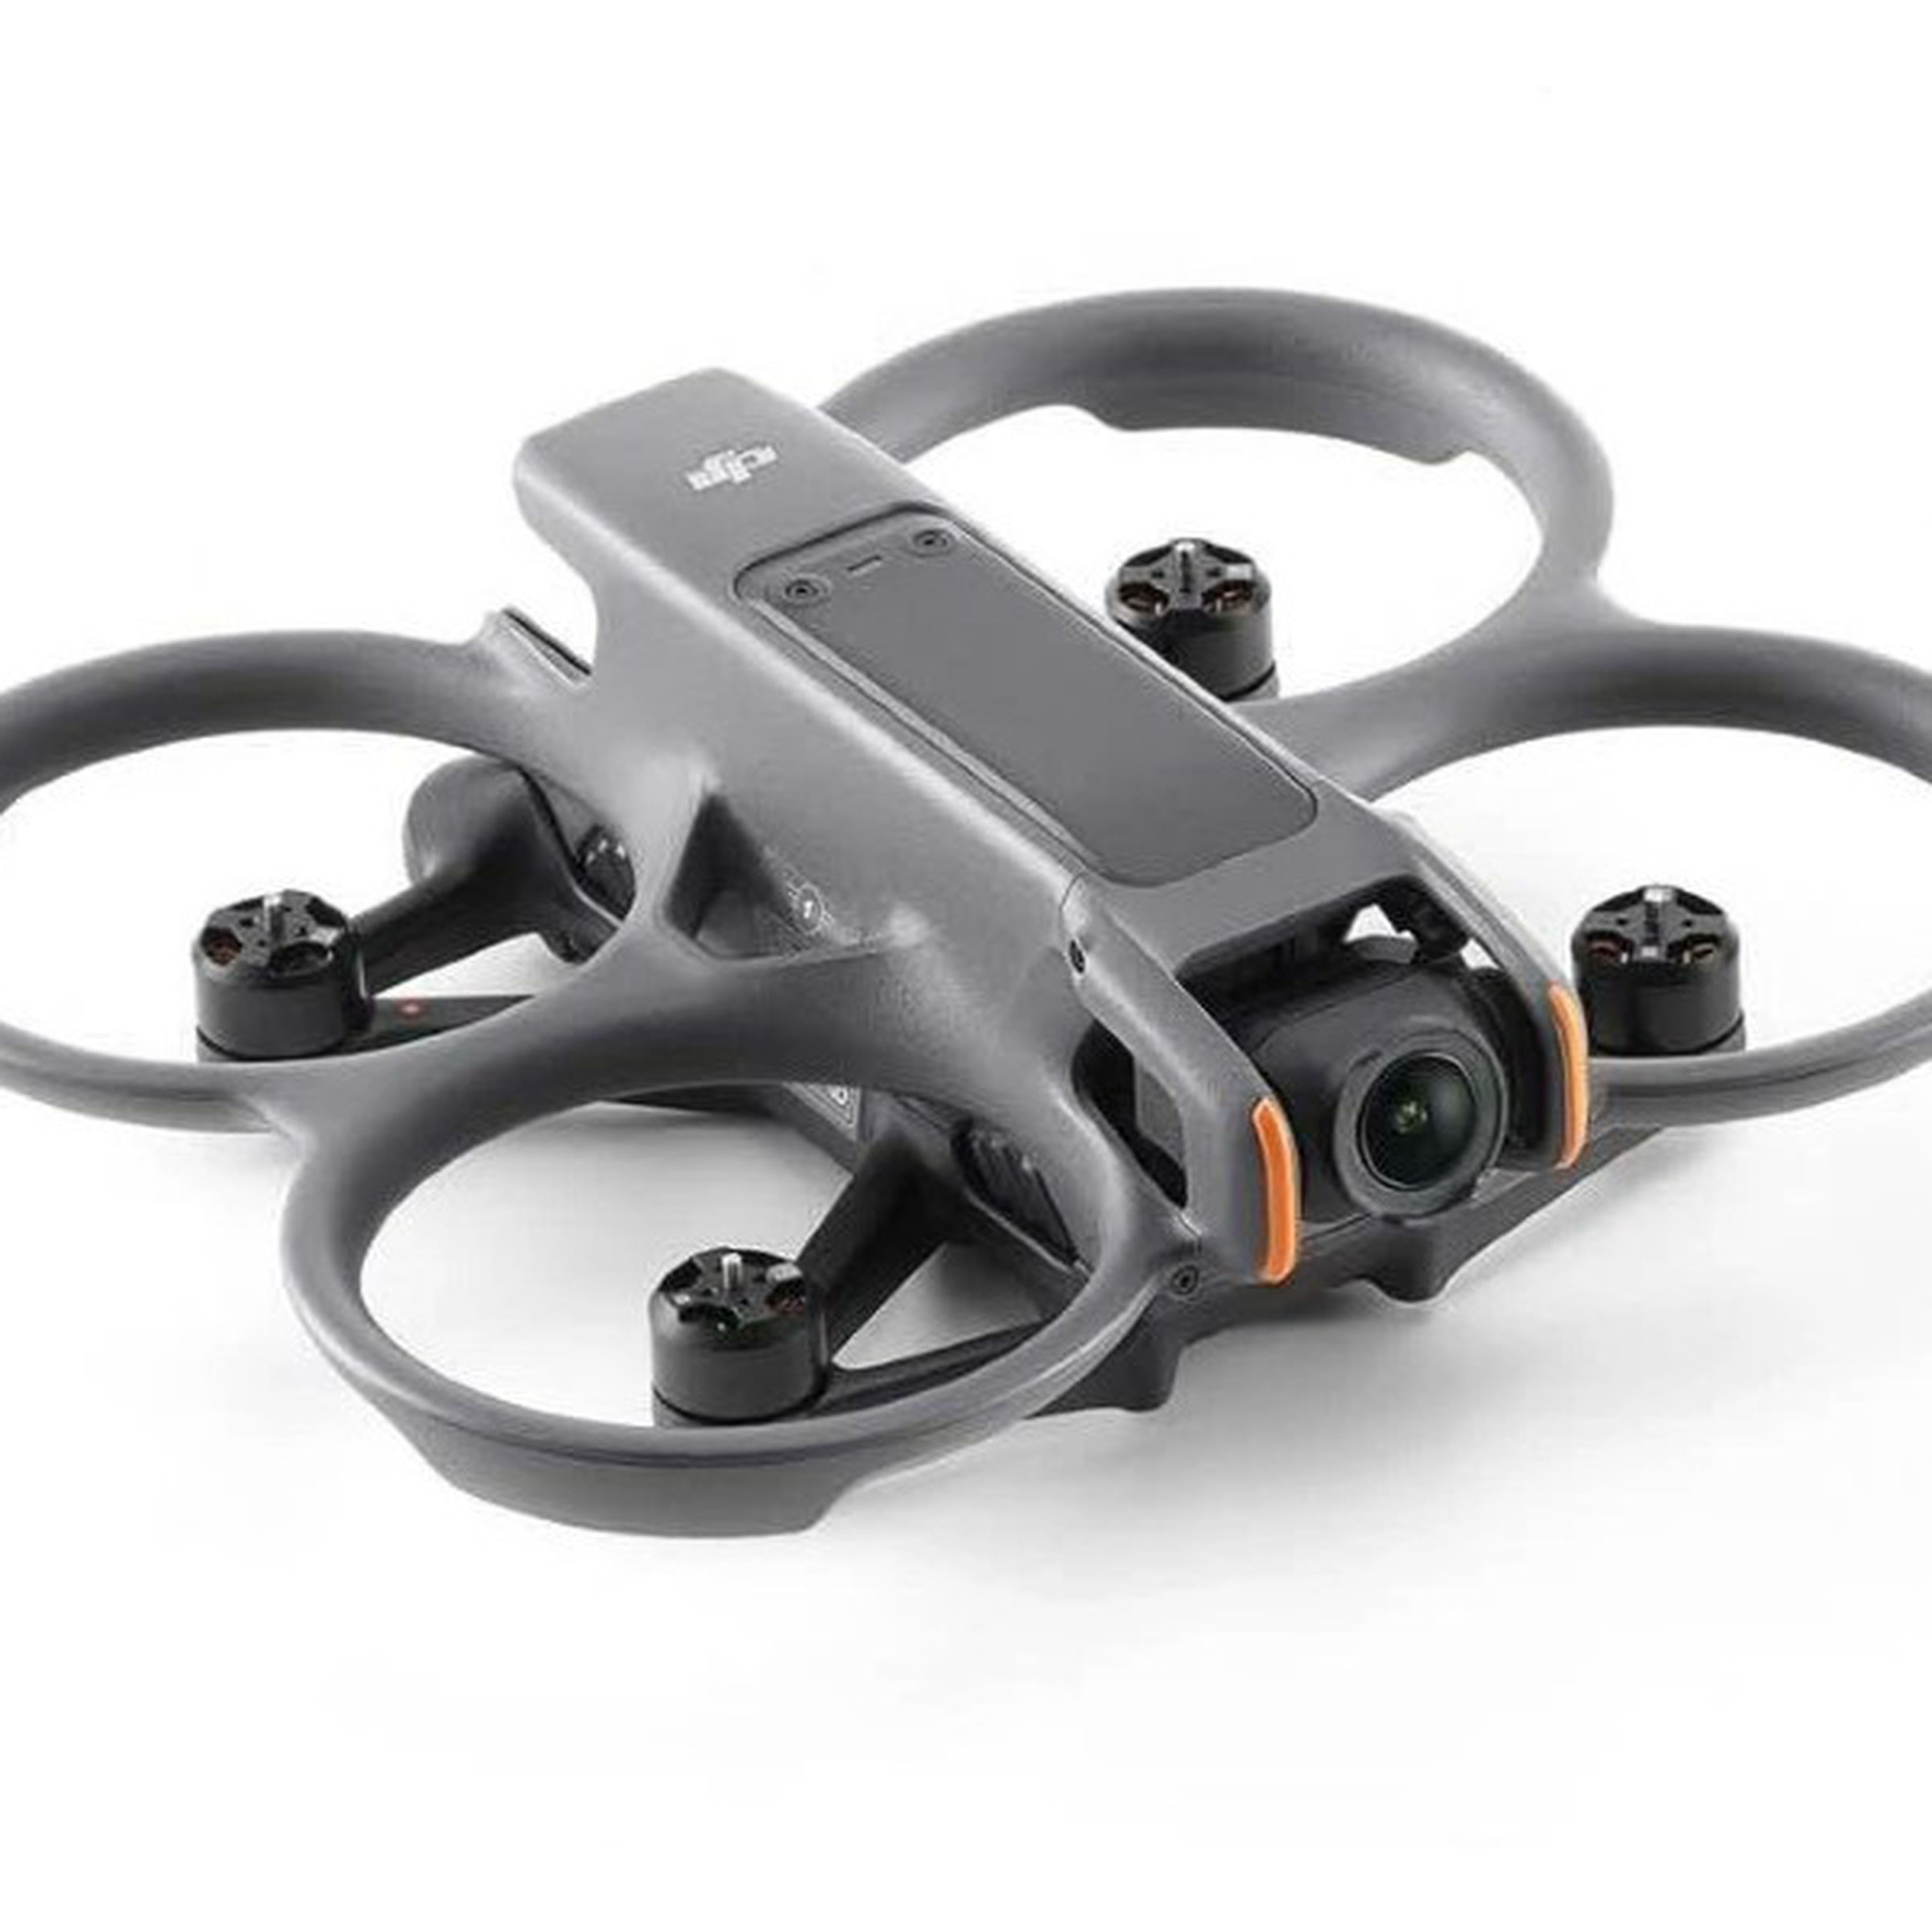 A leaked image showing what appears to be DJI’s Avata 2 drone